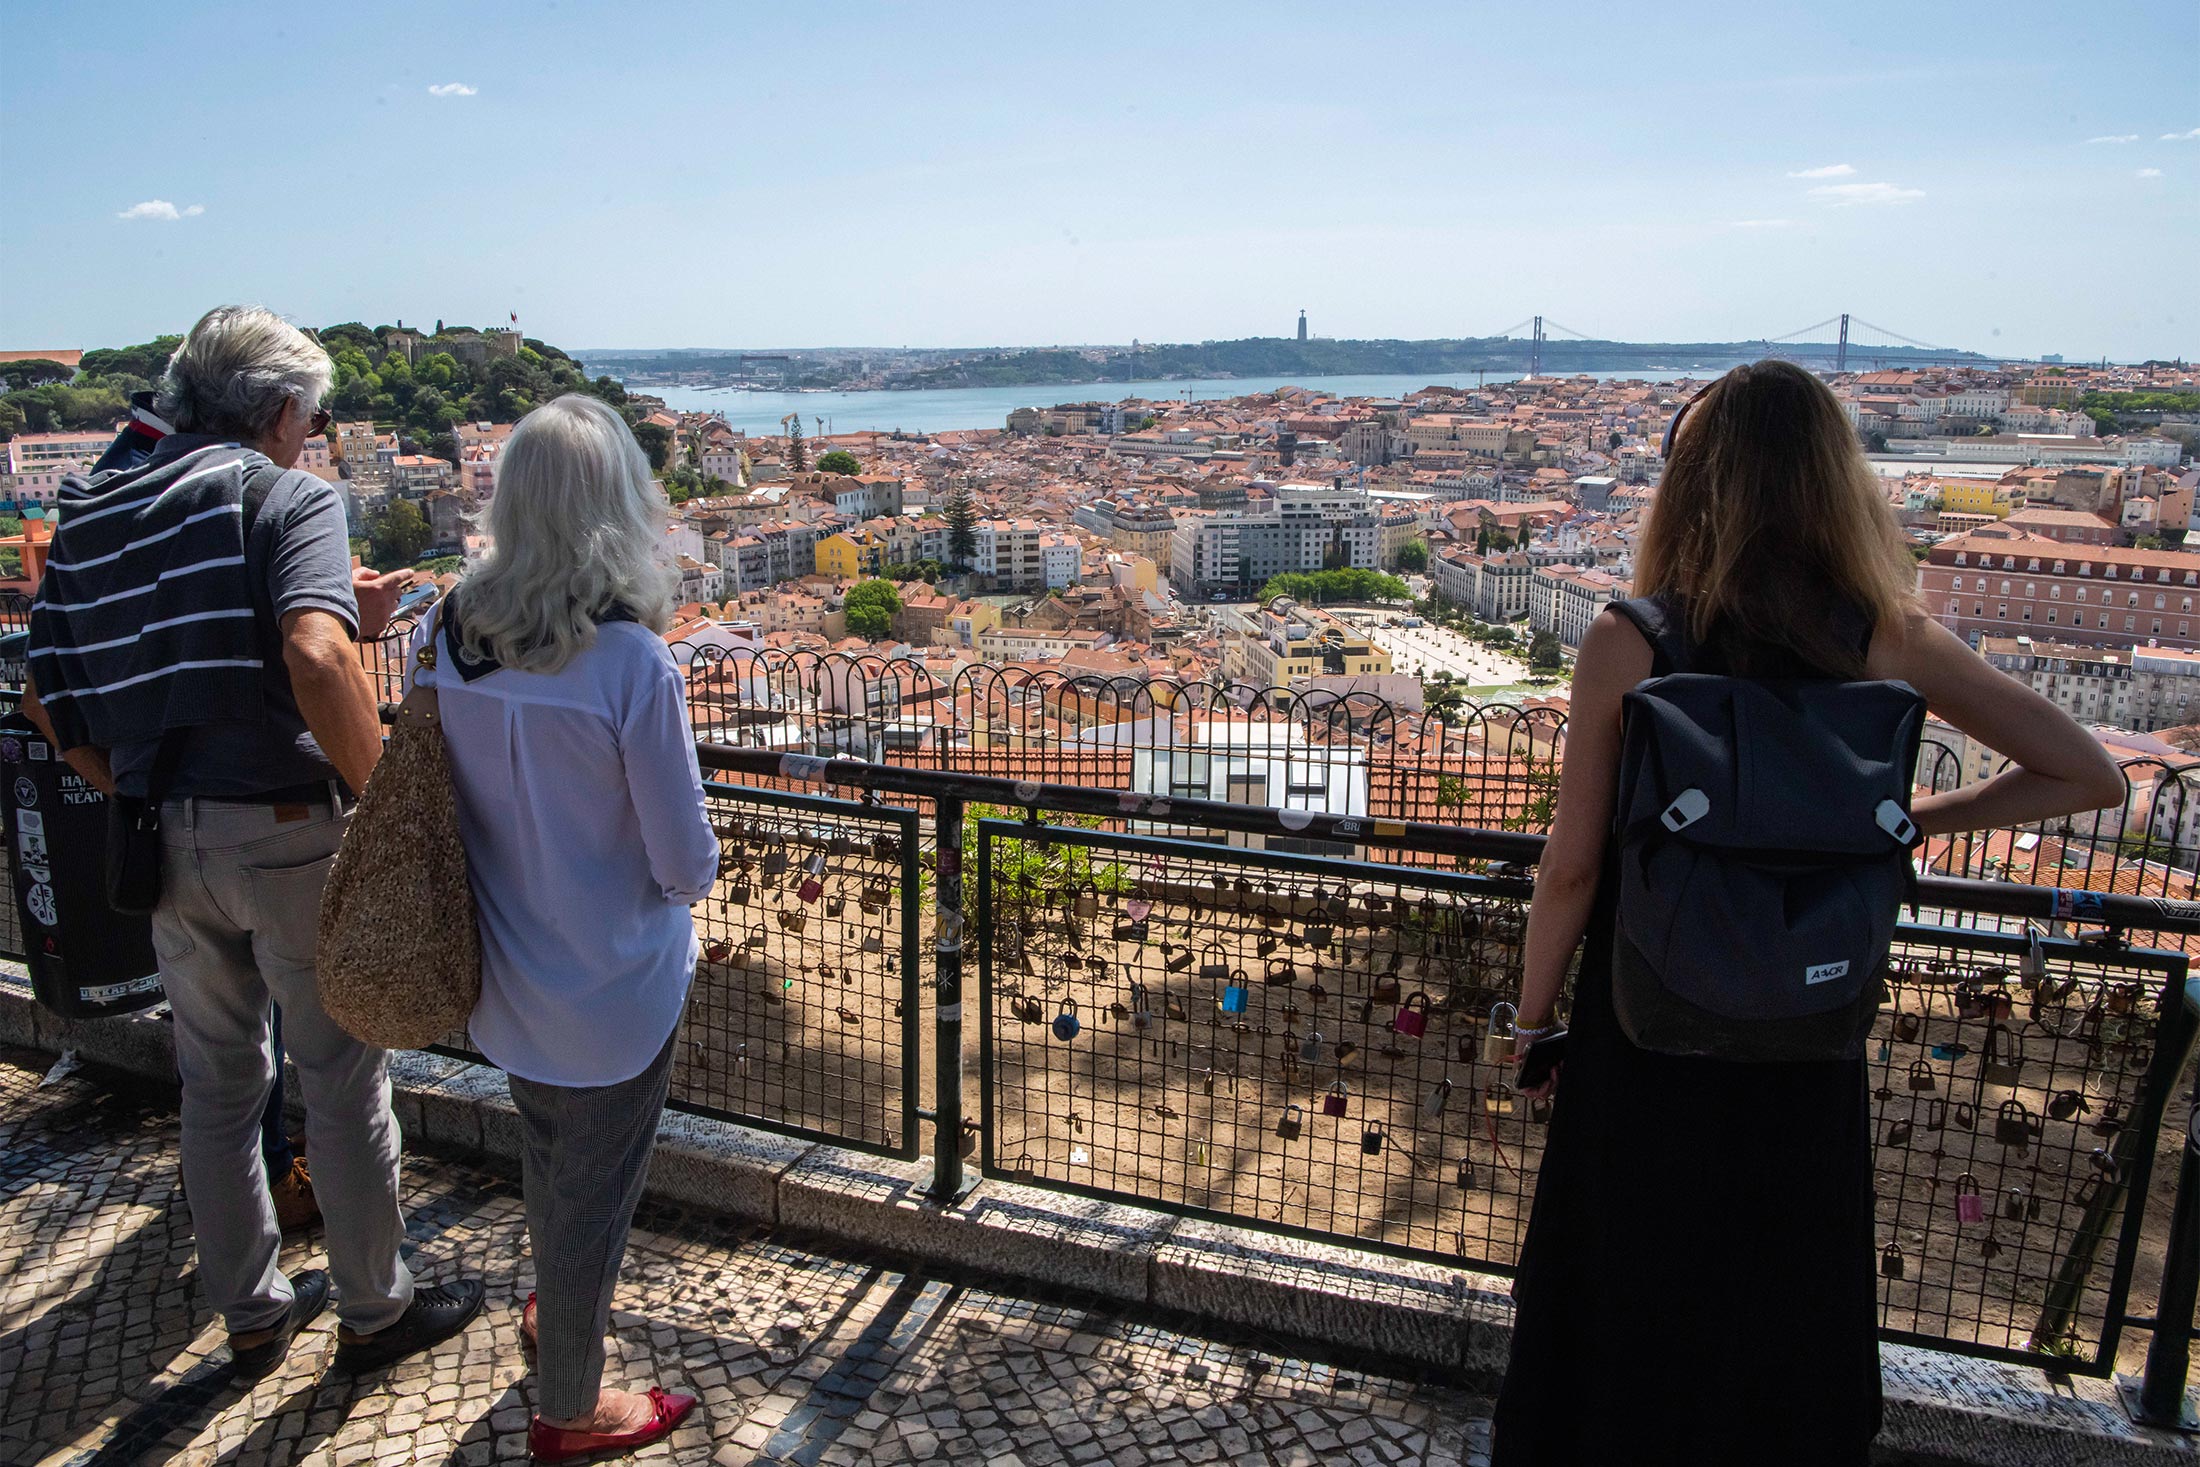 People look at the city skyline in&nbsp;Lisbon, Portugal.